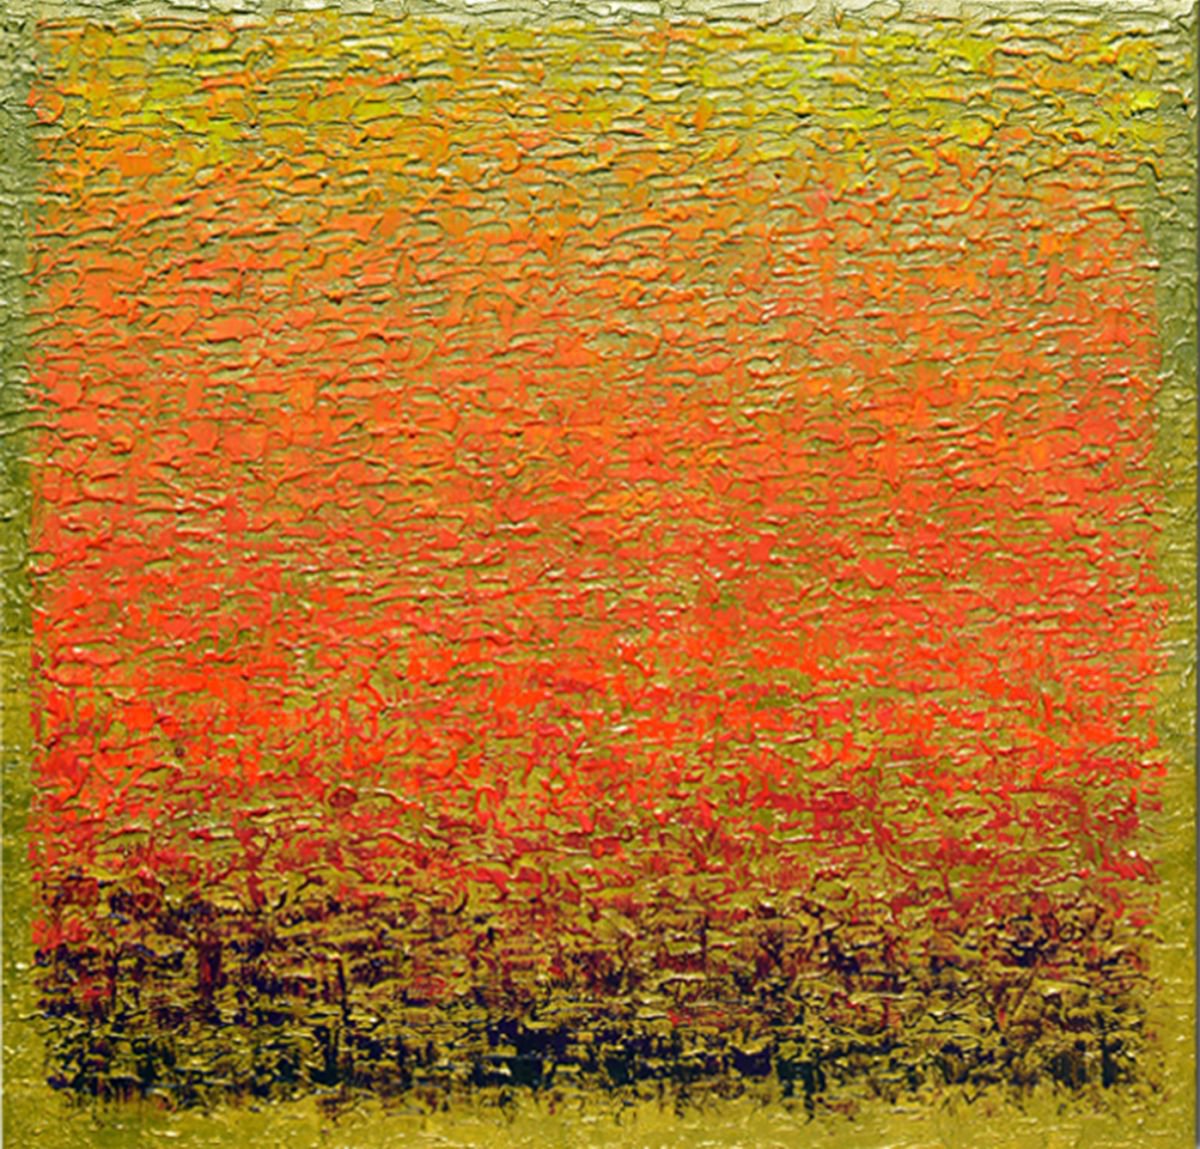 Abstract art - SEA OF GOLD - LARGE SQUARED ABSTRACT PAINTING by VANADA ABSTRACT ART